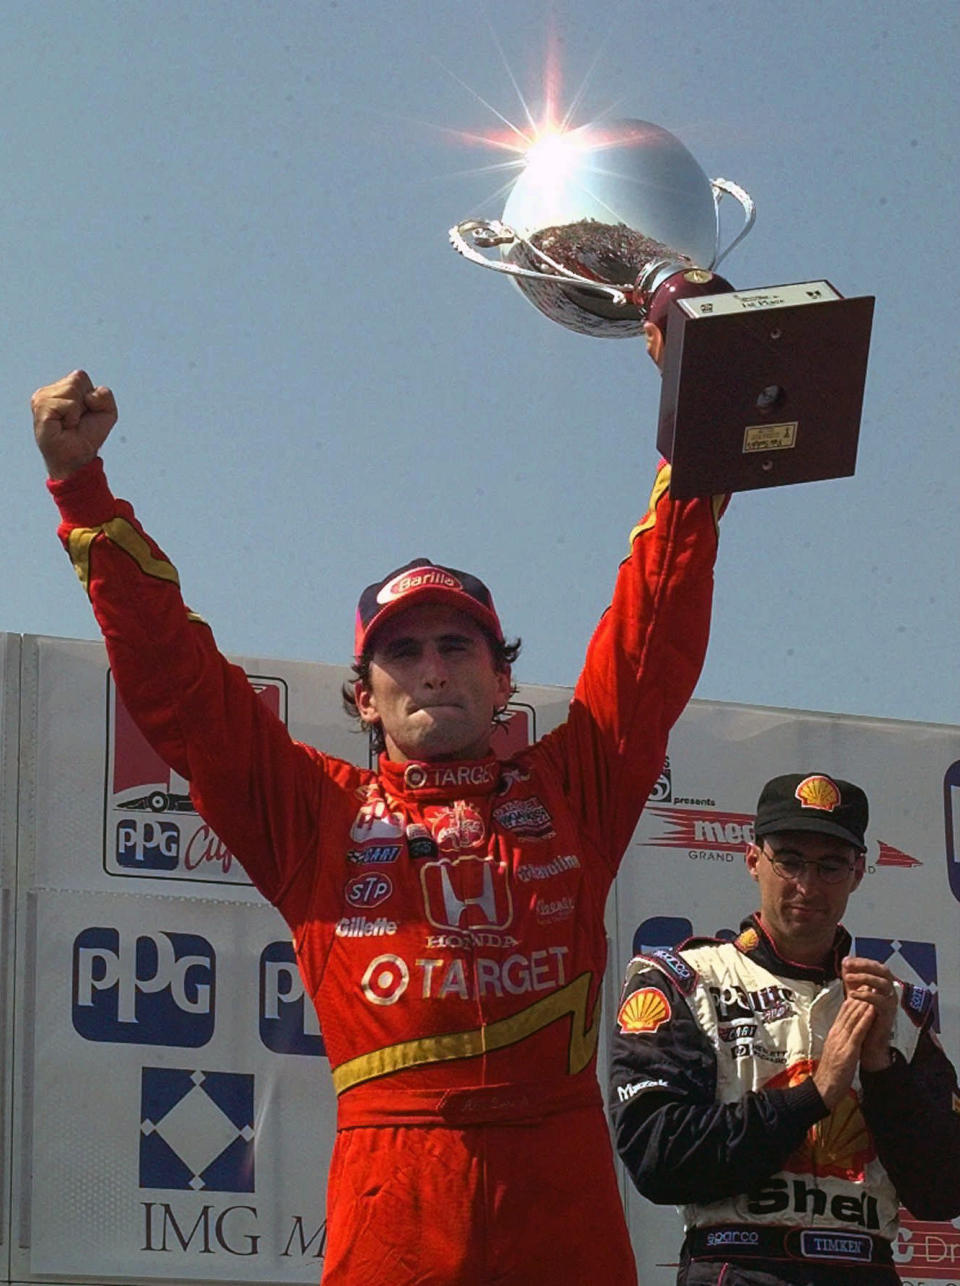 FILE - In this July 13, 1997, file photo, Alex Zanardi hoists his trophy after winning the Grand Prix of Cleveland, as third placed Brian Herta looks on at right. Every now and then Alex Zanardi has a chance encounter with someone who reminds him there’s never any reason to feel sorry for himself, not that he ever had during his two vastly different lifetimes: the one with legs, and the other as a double-amputee. (AP Photo/Amy Sancetta, File)